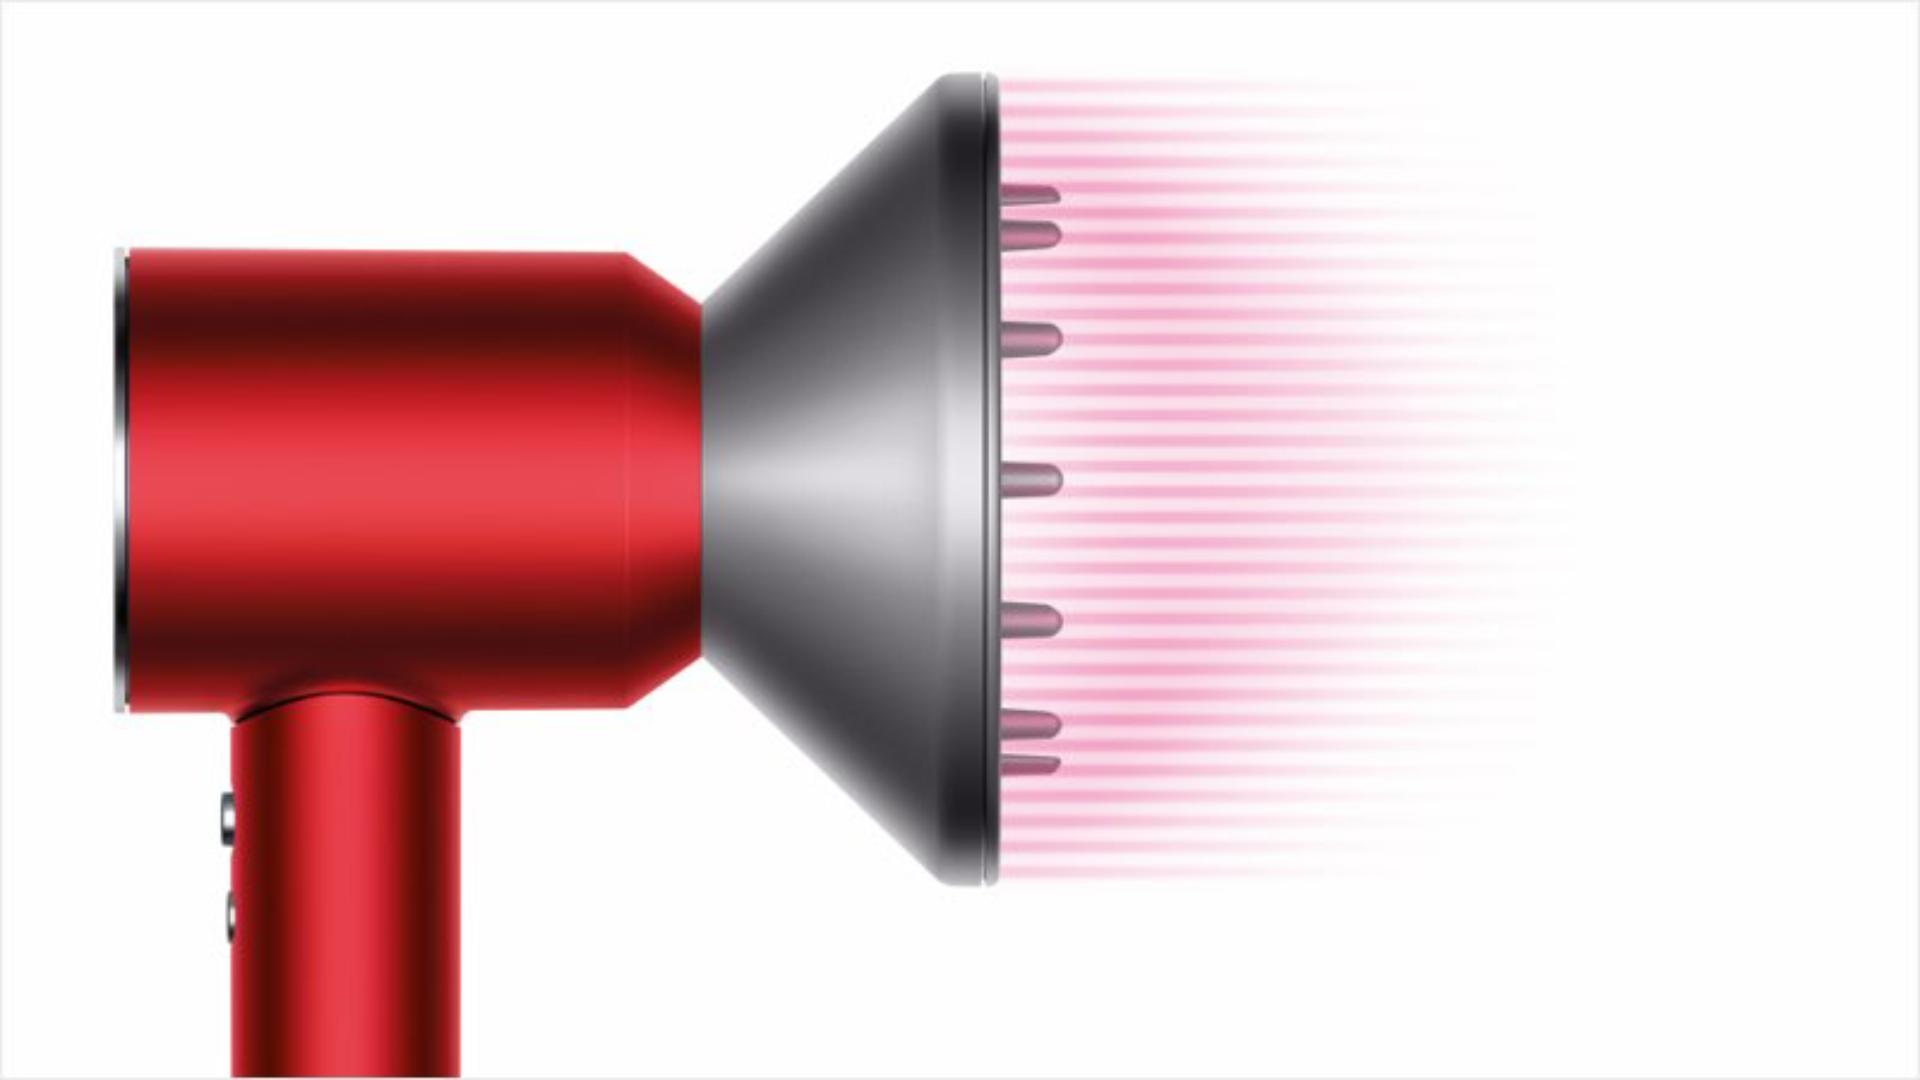 Dyson Supersonic™ hair dryer with re-engineered Diffuser attached